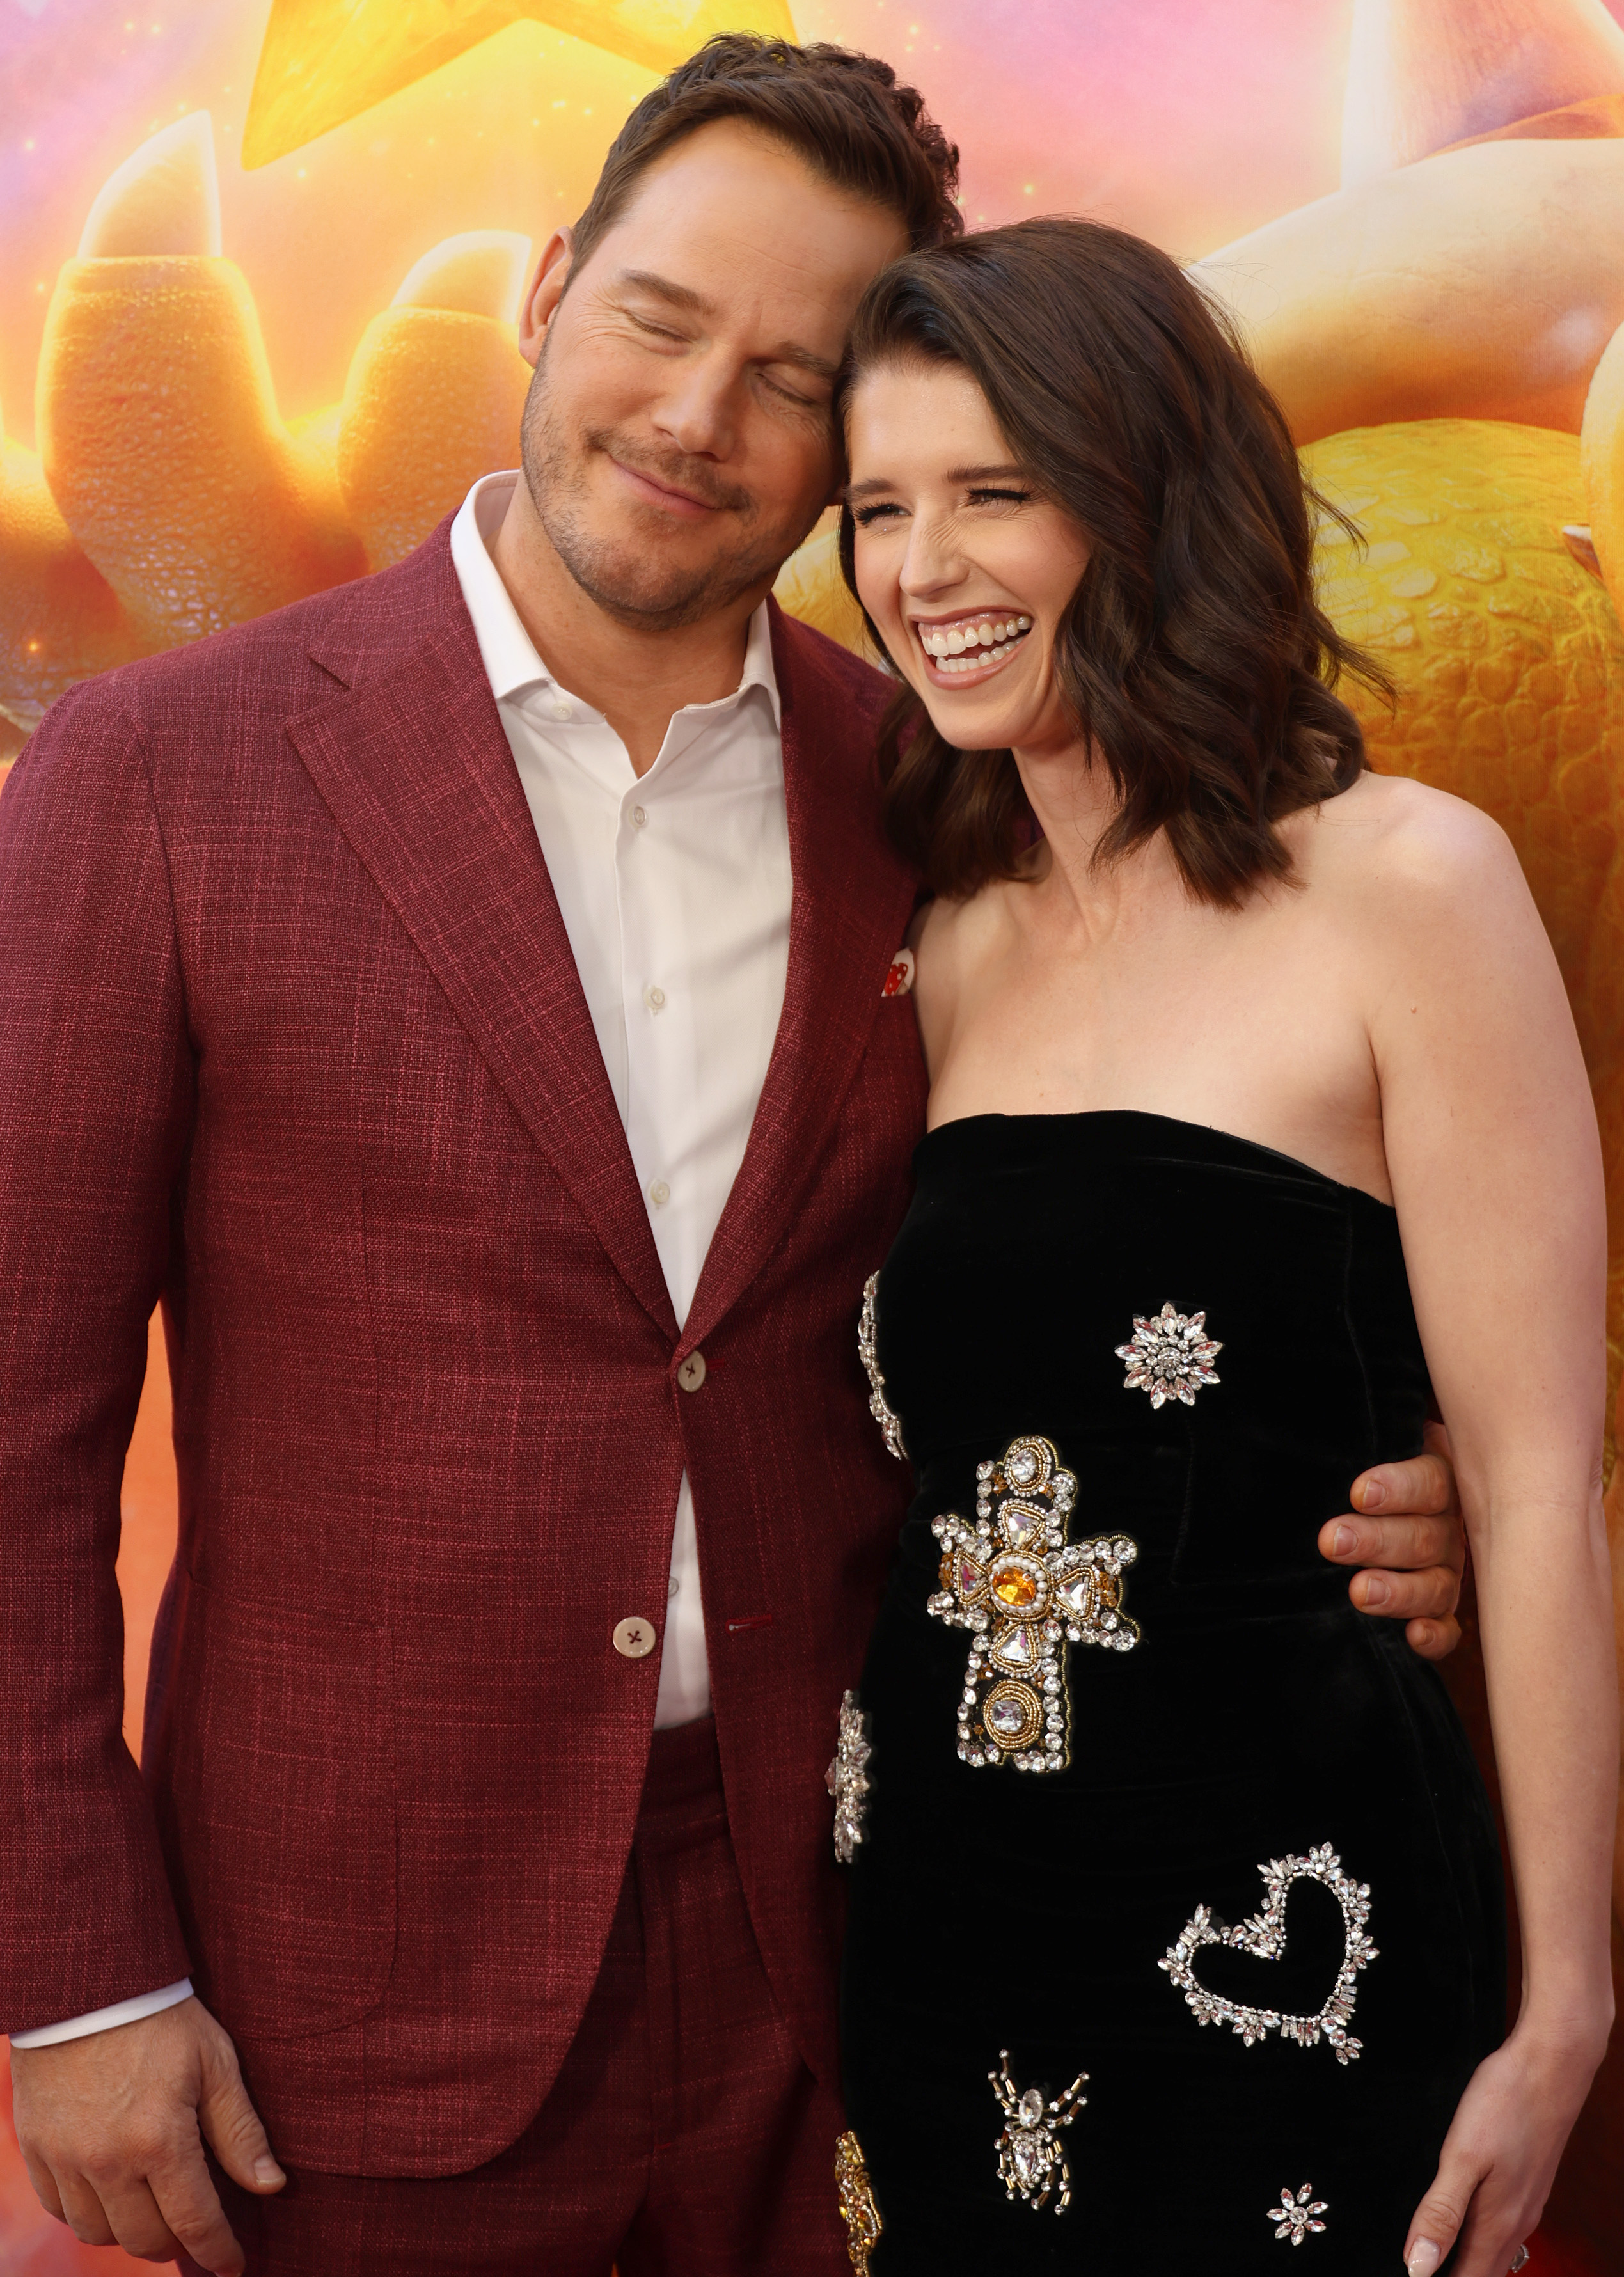 Chris Pratt and Katherine Schwarzenegger attend a Special Screening of Universal Pictures' "The Super Mario Bros. Movie" at Regal LA Live on April 01, 2023 in Los Angeles, California | Source: Getty Images